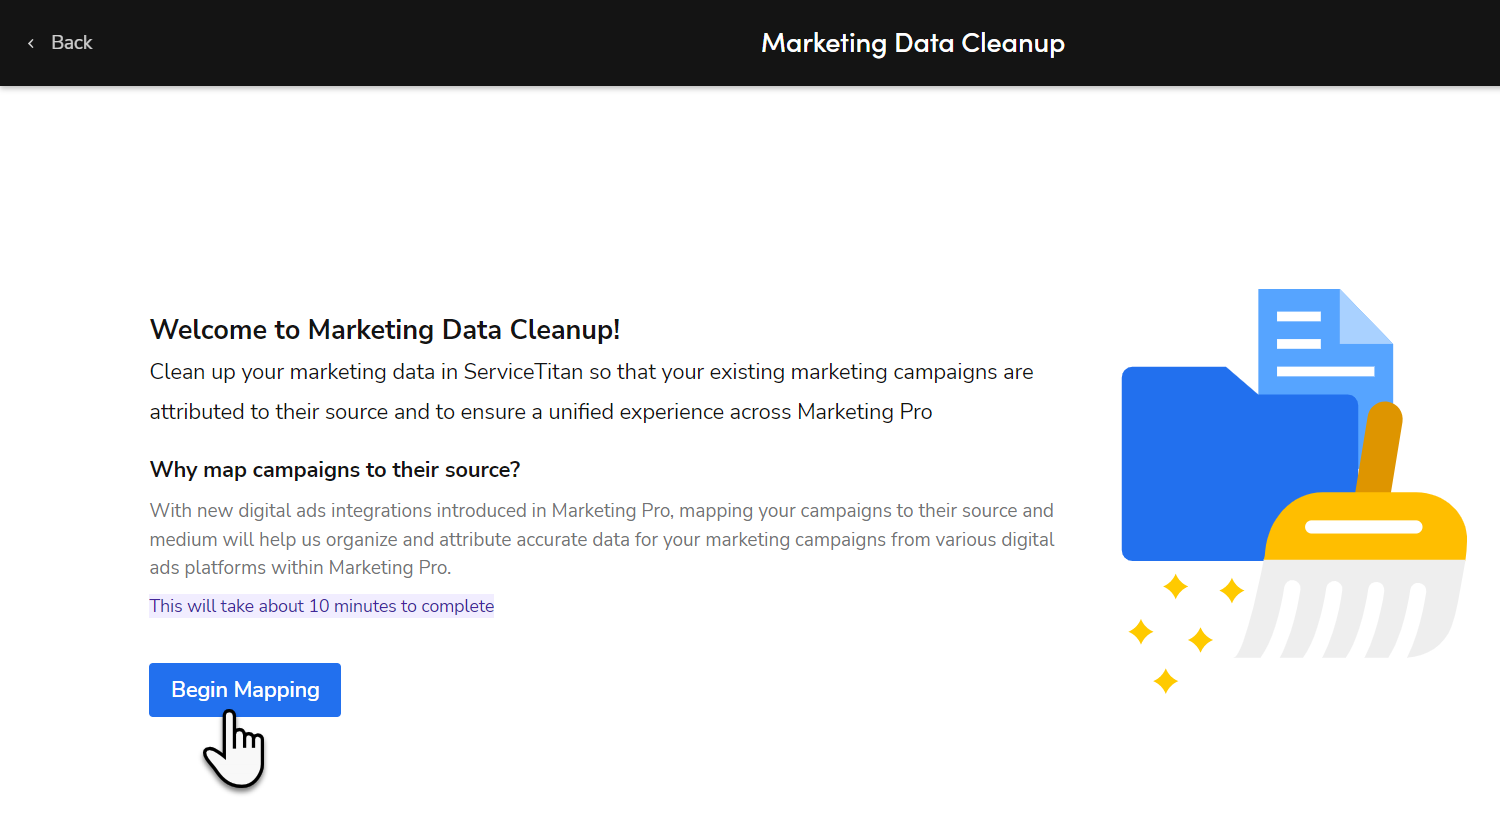 Begin Mapping marketing campaign data